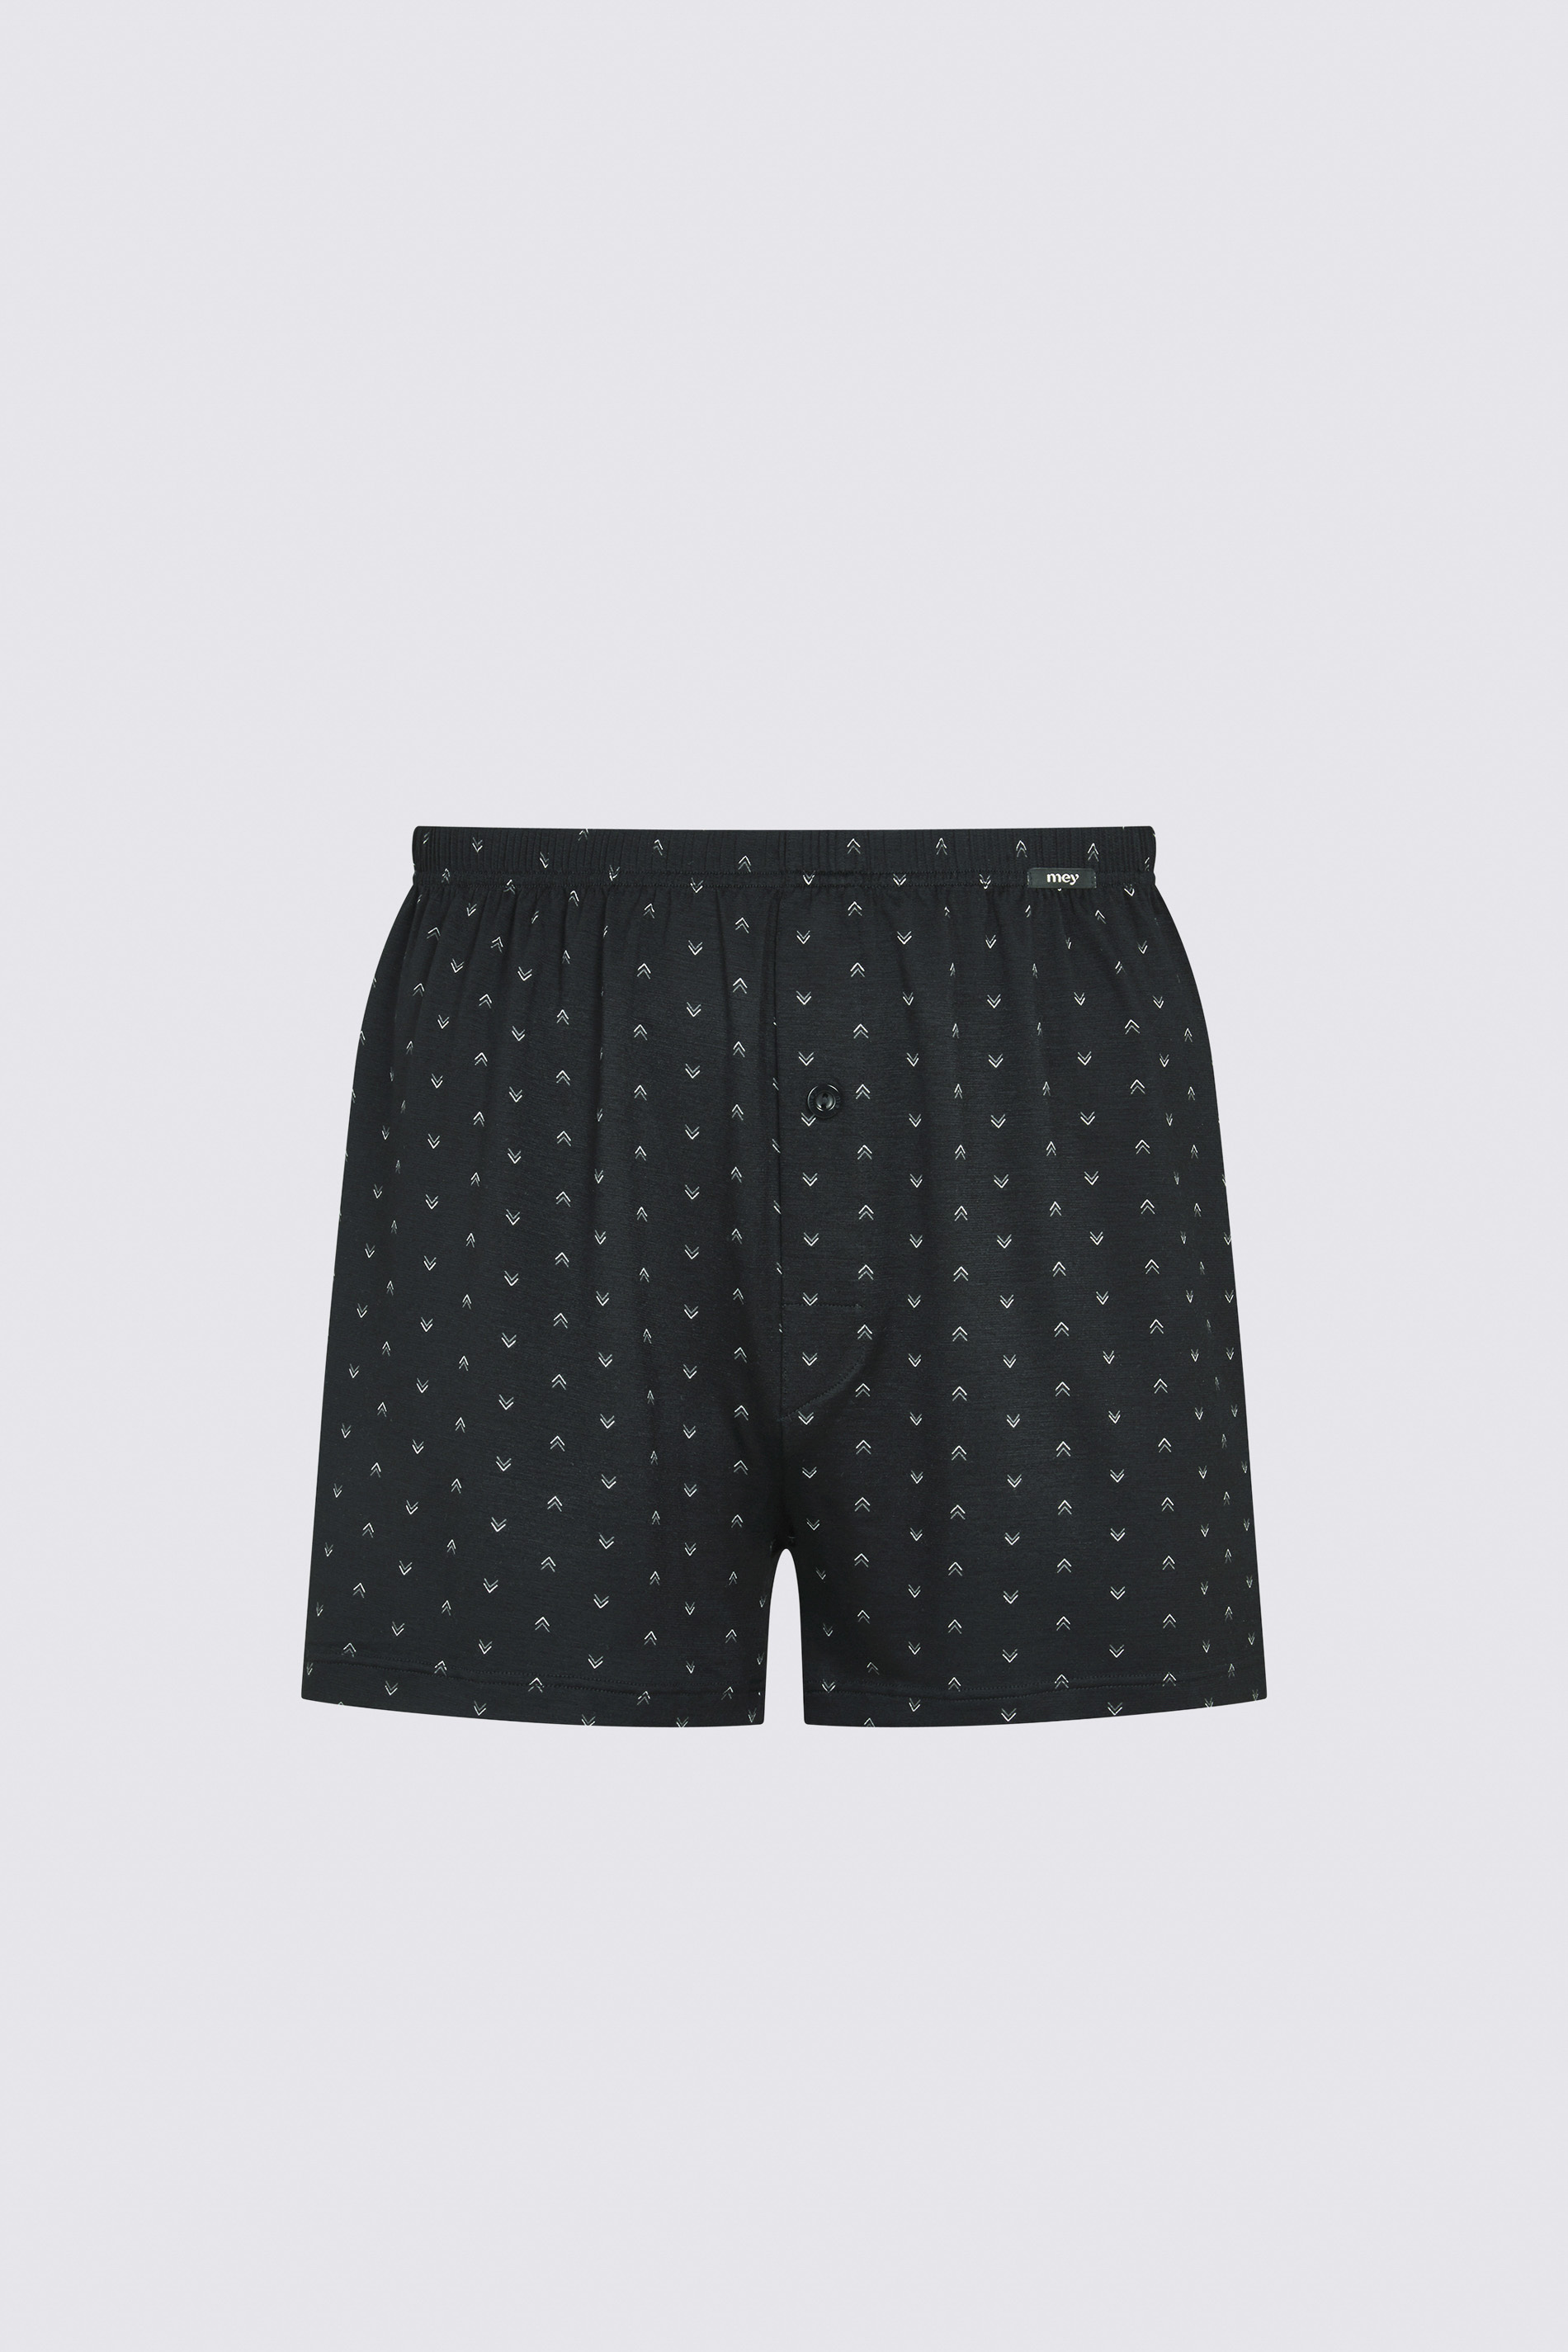 Boxer shorts Black Serie BC Small Arrow Cut Out | mey®